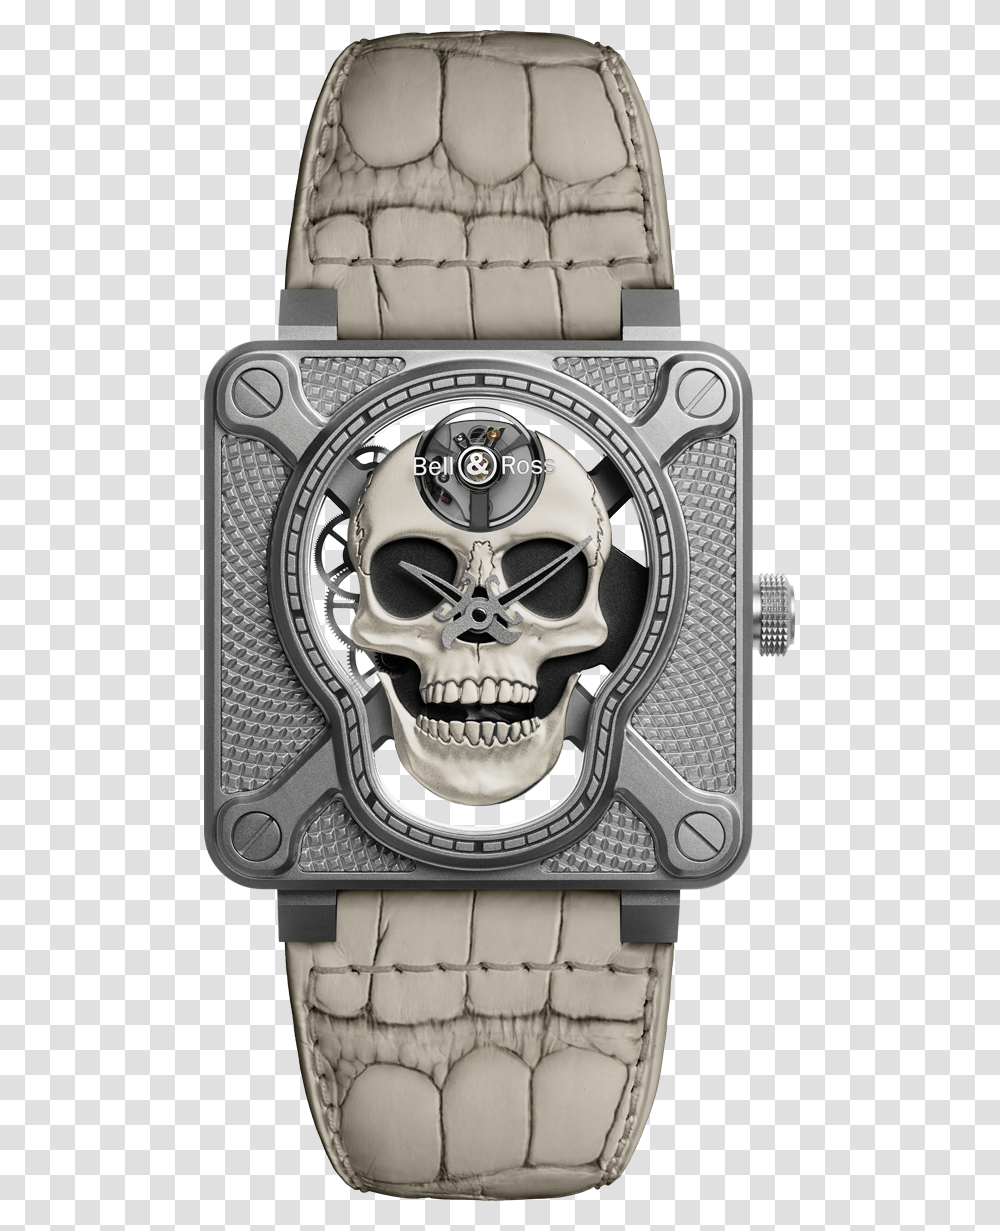 Laughing Skull Bell Ross, Clock Tower, Architecture, Building, Wristwatch Transparent Png